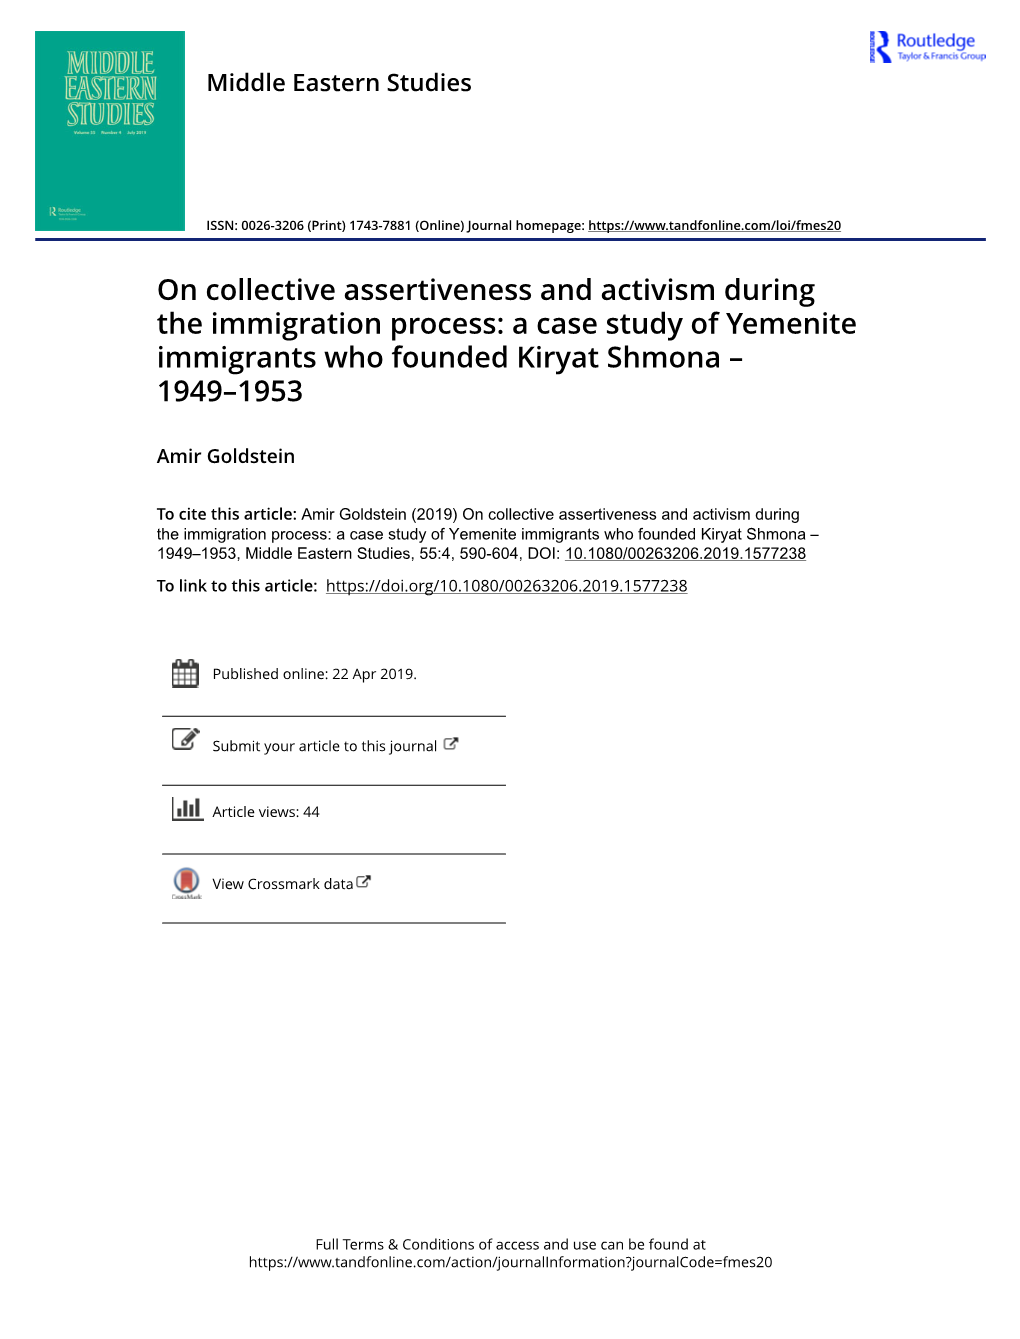 On Collective Assertiveness and Activism During the Immigration Process: a Case Study of Yemenite Immigrants Who Founded Kiryat Shmona – 1949–1953